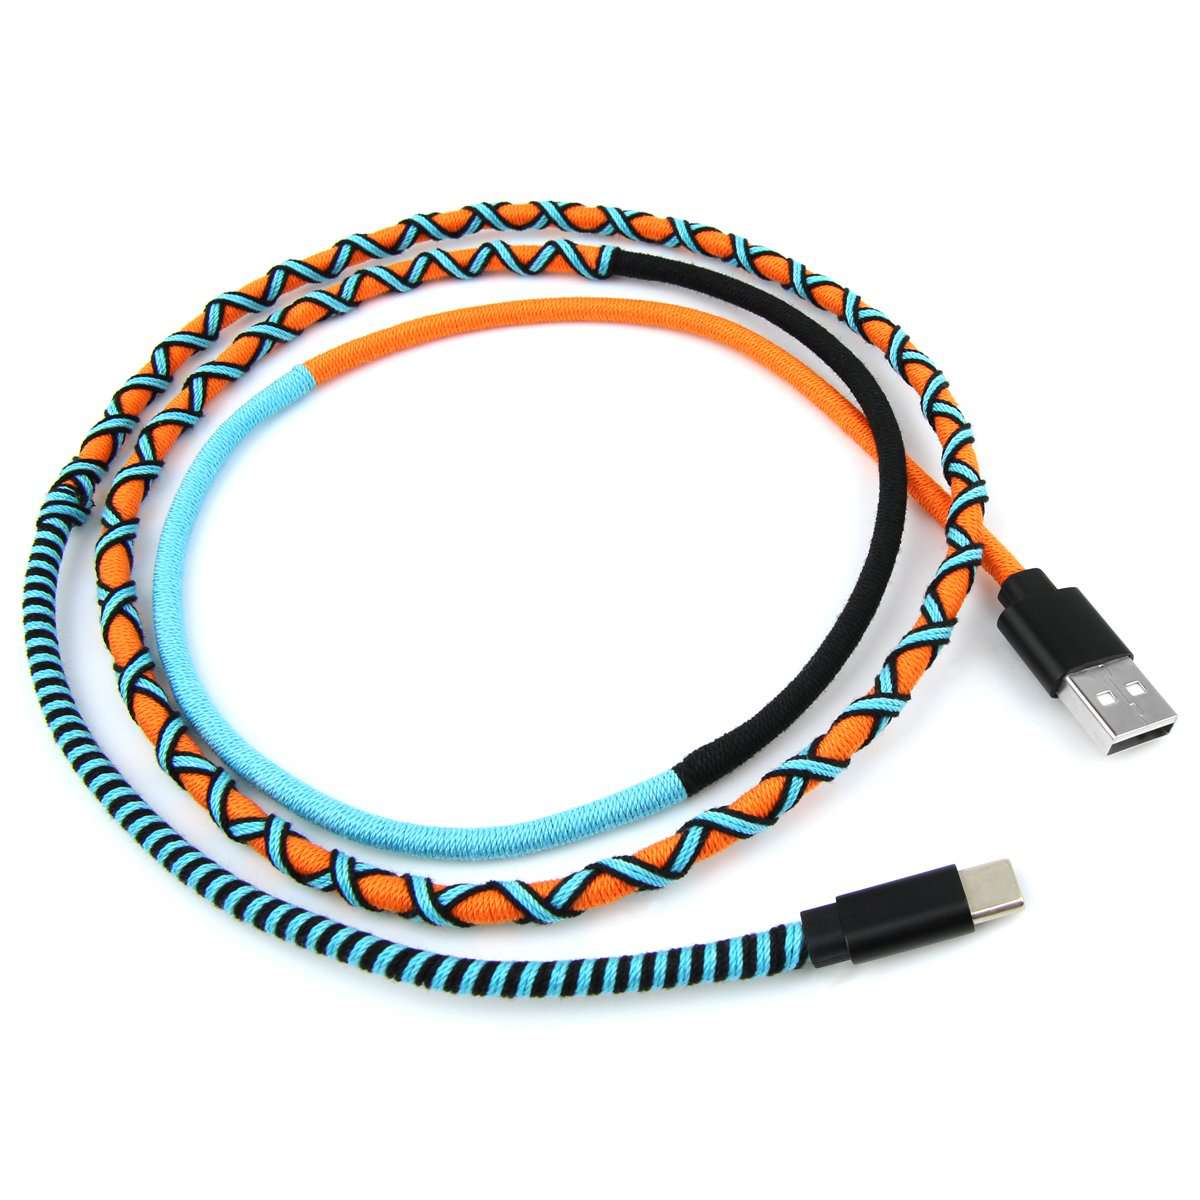 Type C Fast Charging Cable - Orange & Blue